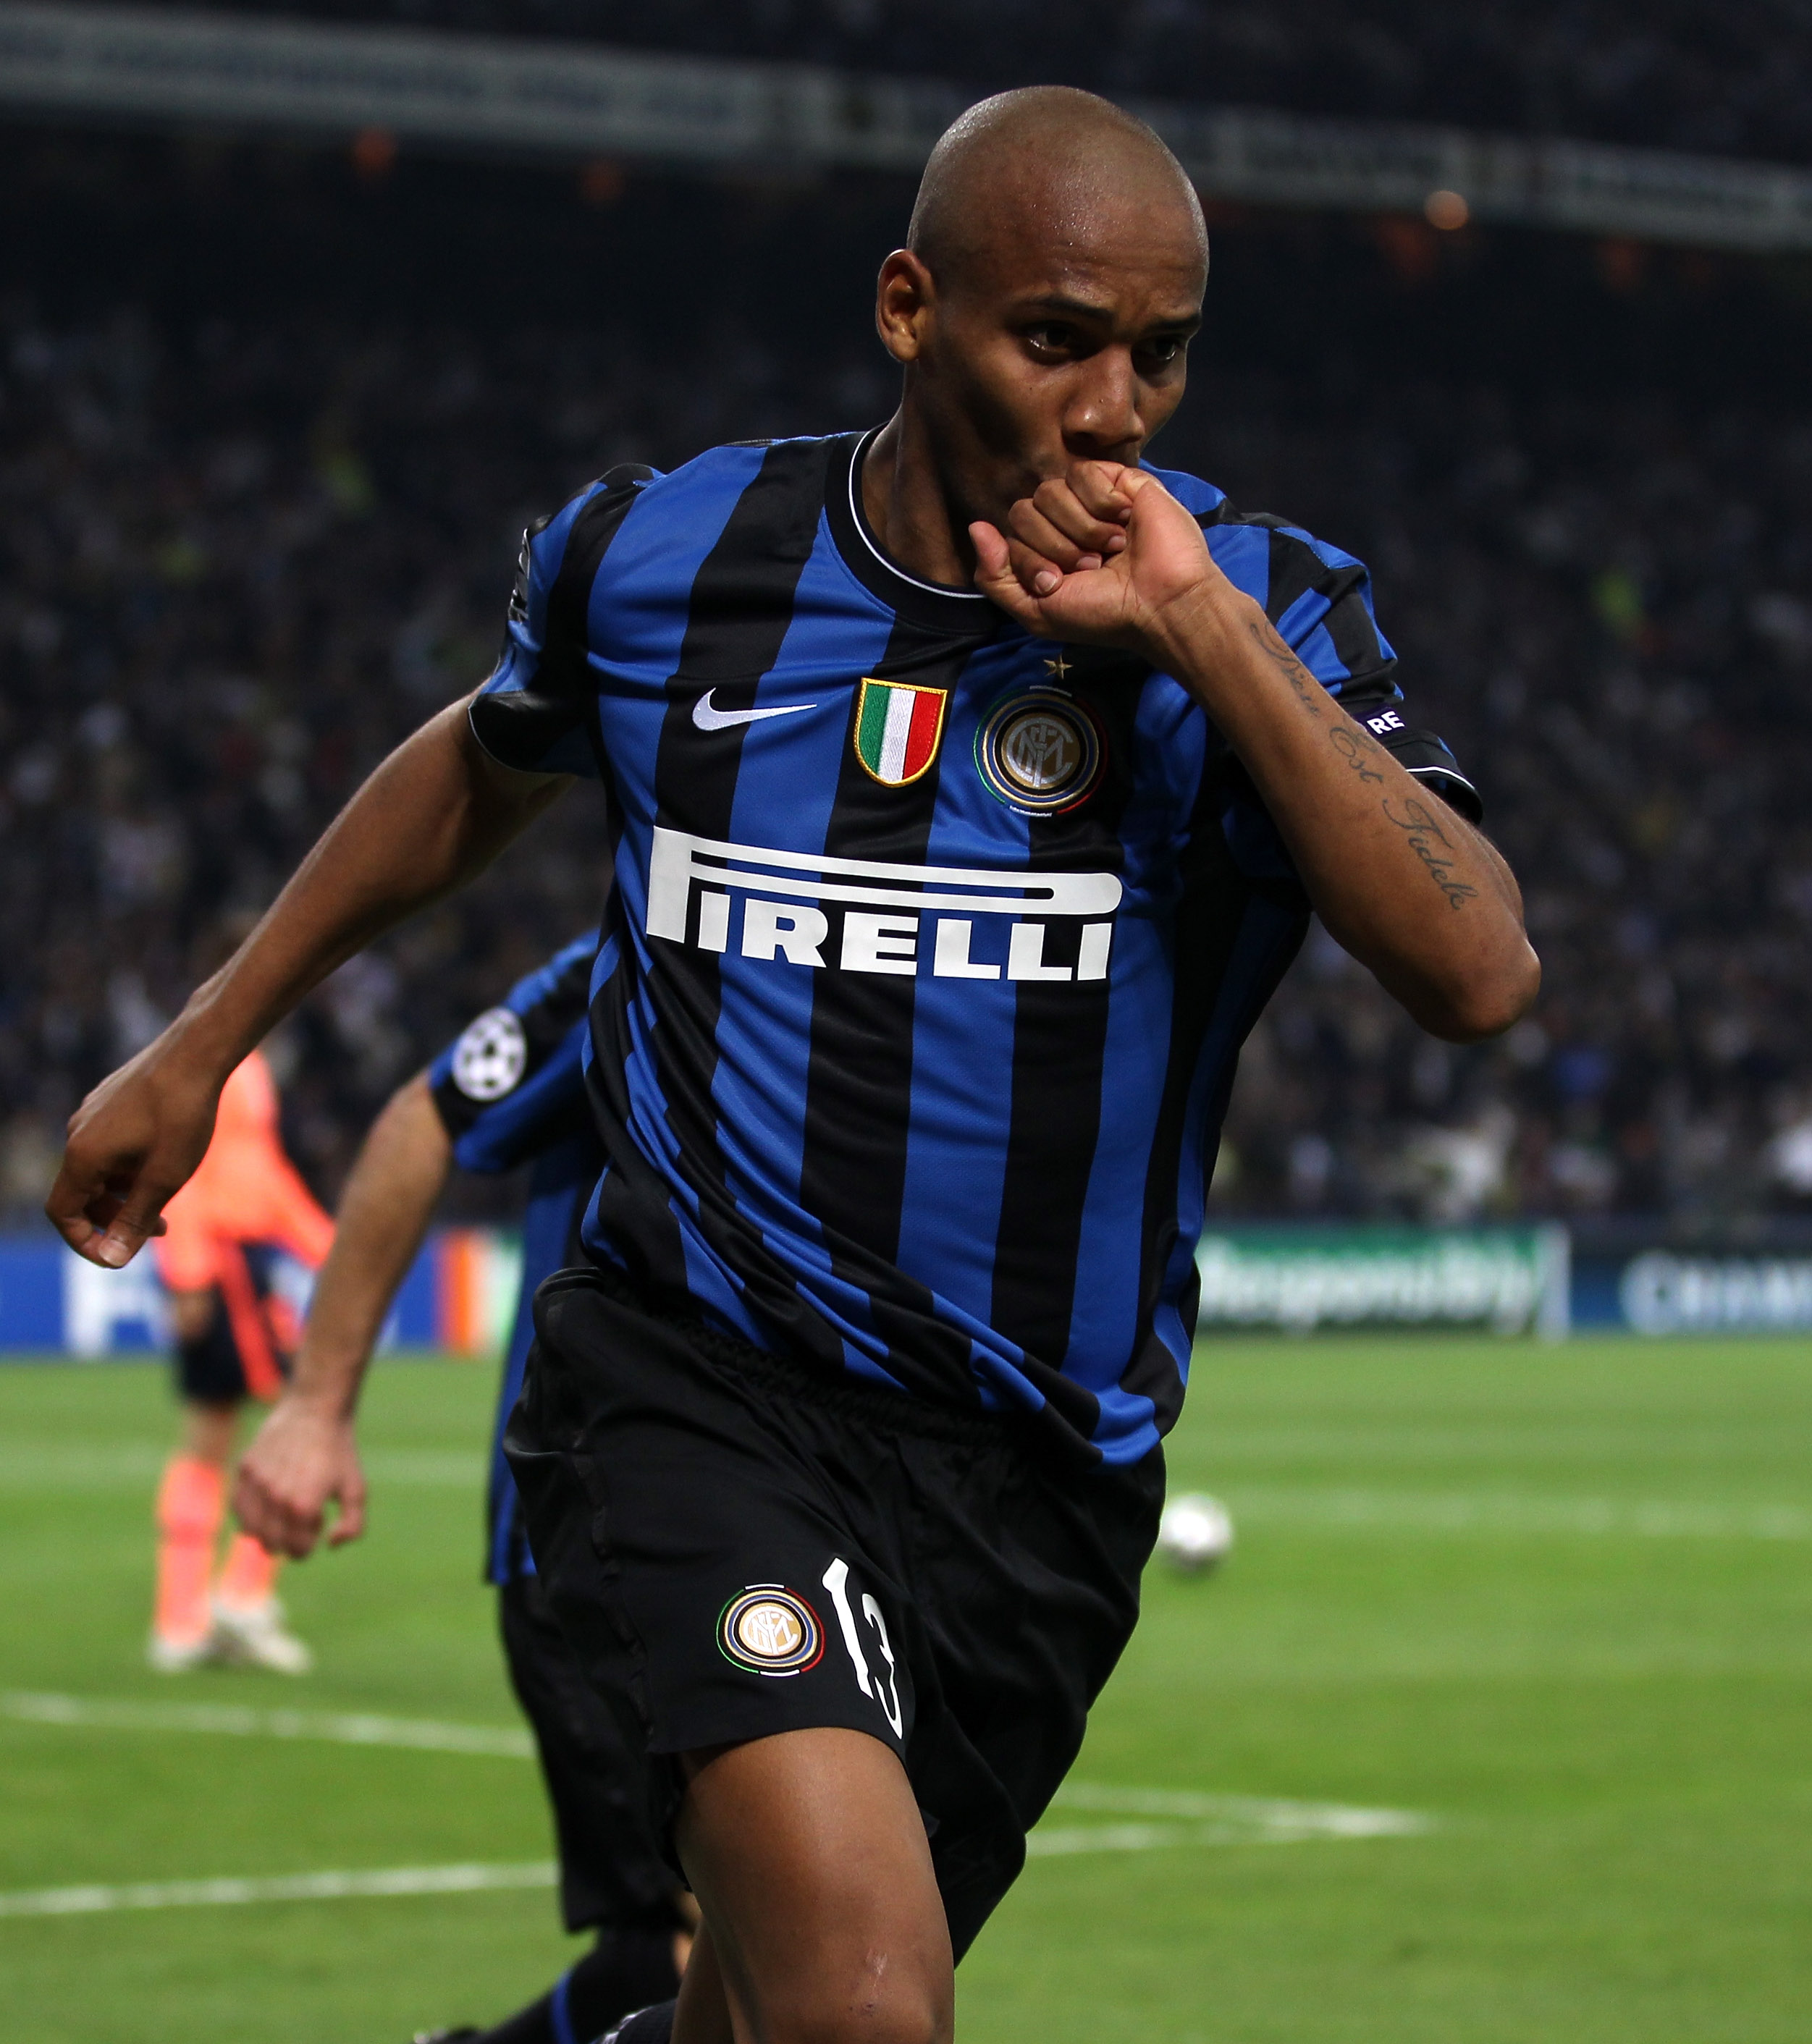 MILAN, ITALY - APRIL 20:  Maicon of Inter celebrates scoring his teams second goal during the UEFA Champions League Semi Final 1st Leg match between Inter Milan and Barcelona at the San Siro on April 20, 2010 in Milan, Italy.  (Photo by Julian Finney/Gett